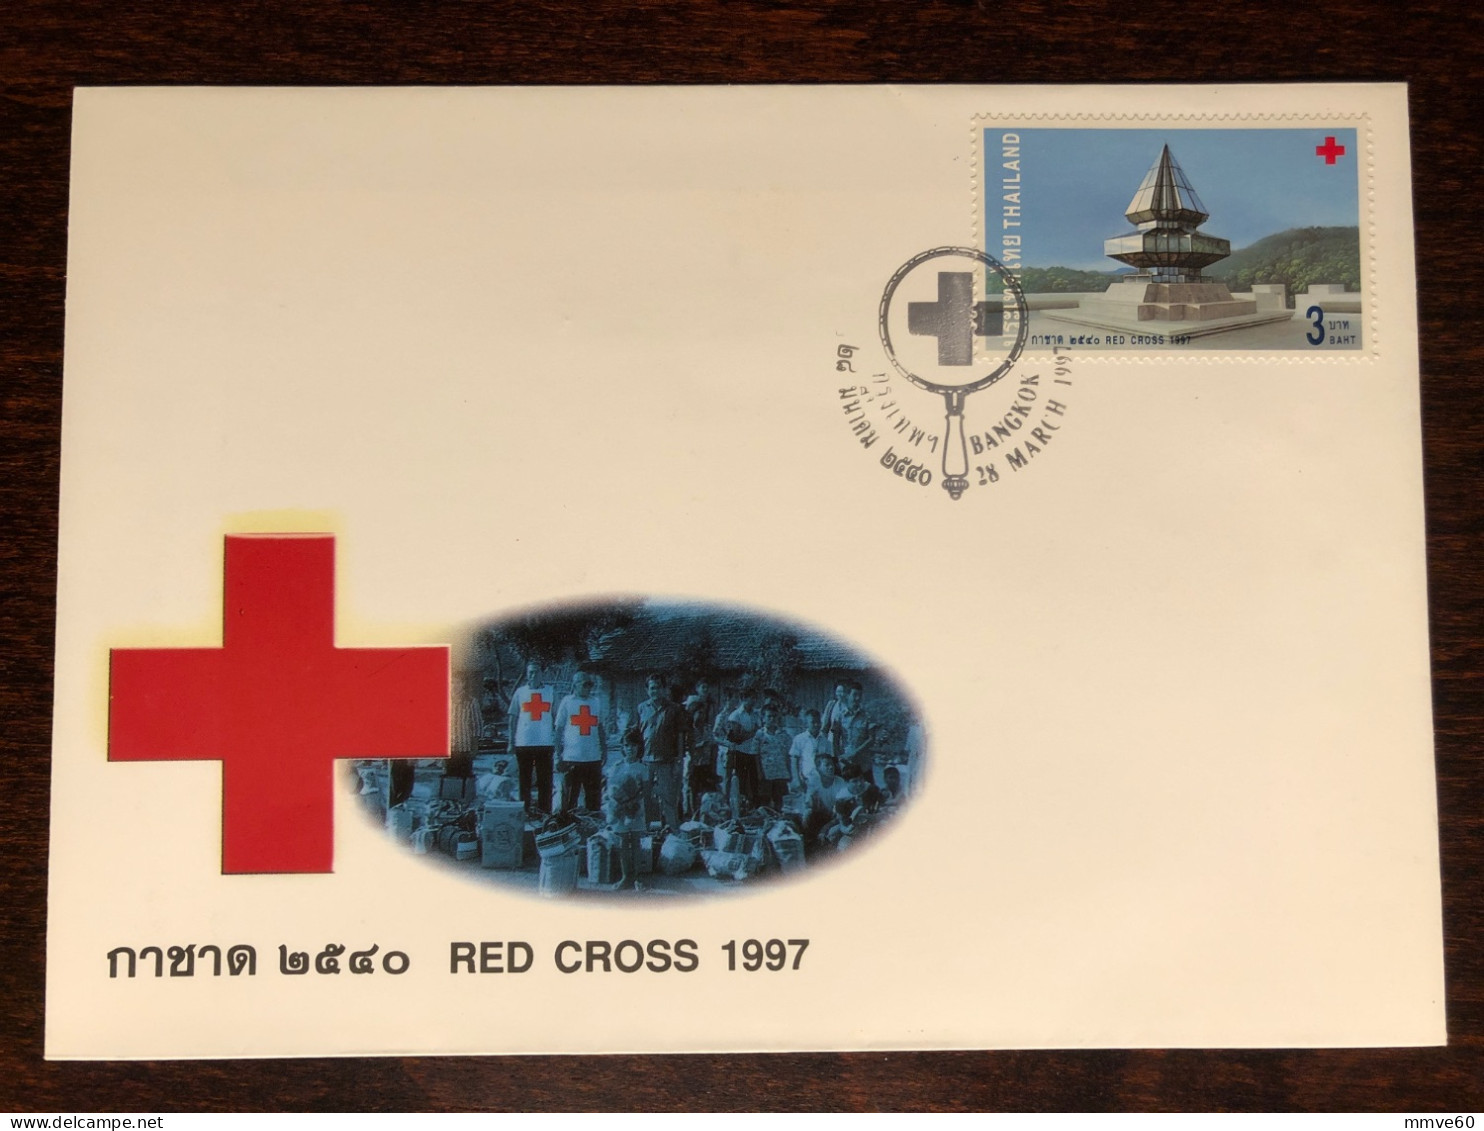 THAILAND FDC COVER 1997 YEAR RED CROSS HEALTH MEDICINE STAMPS - Tailandia